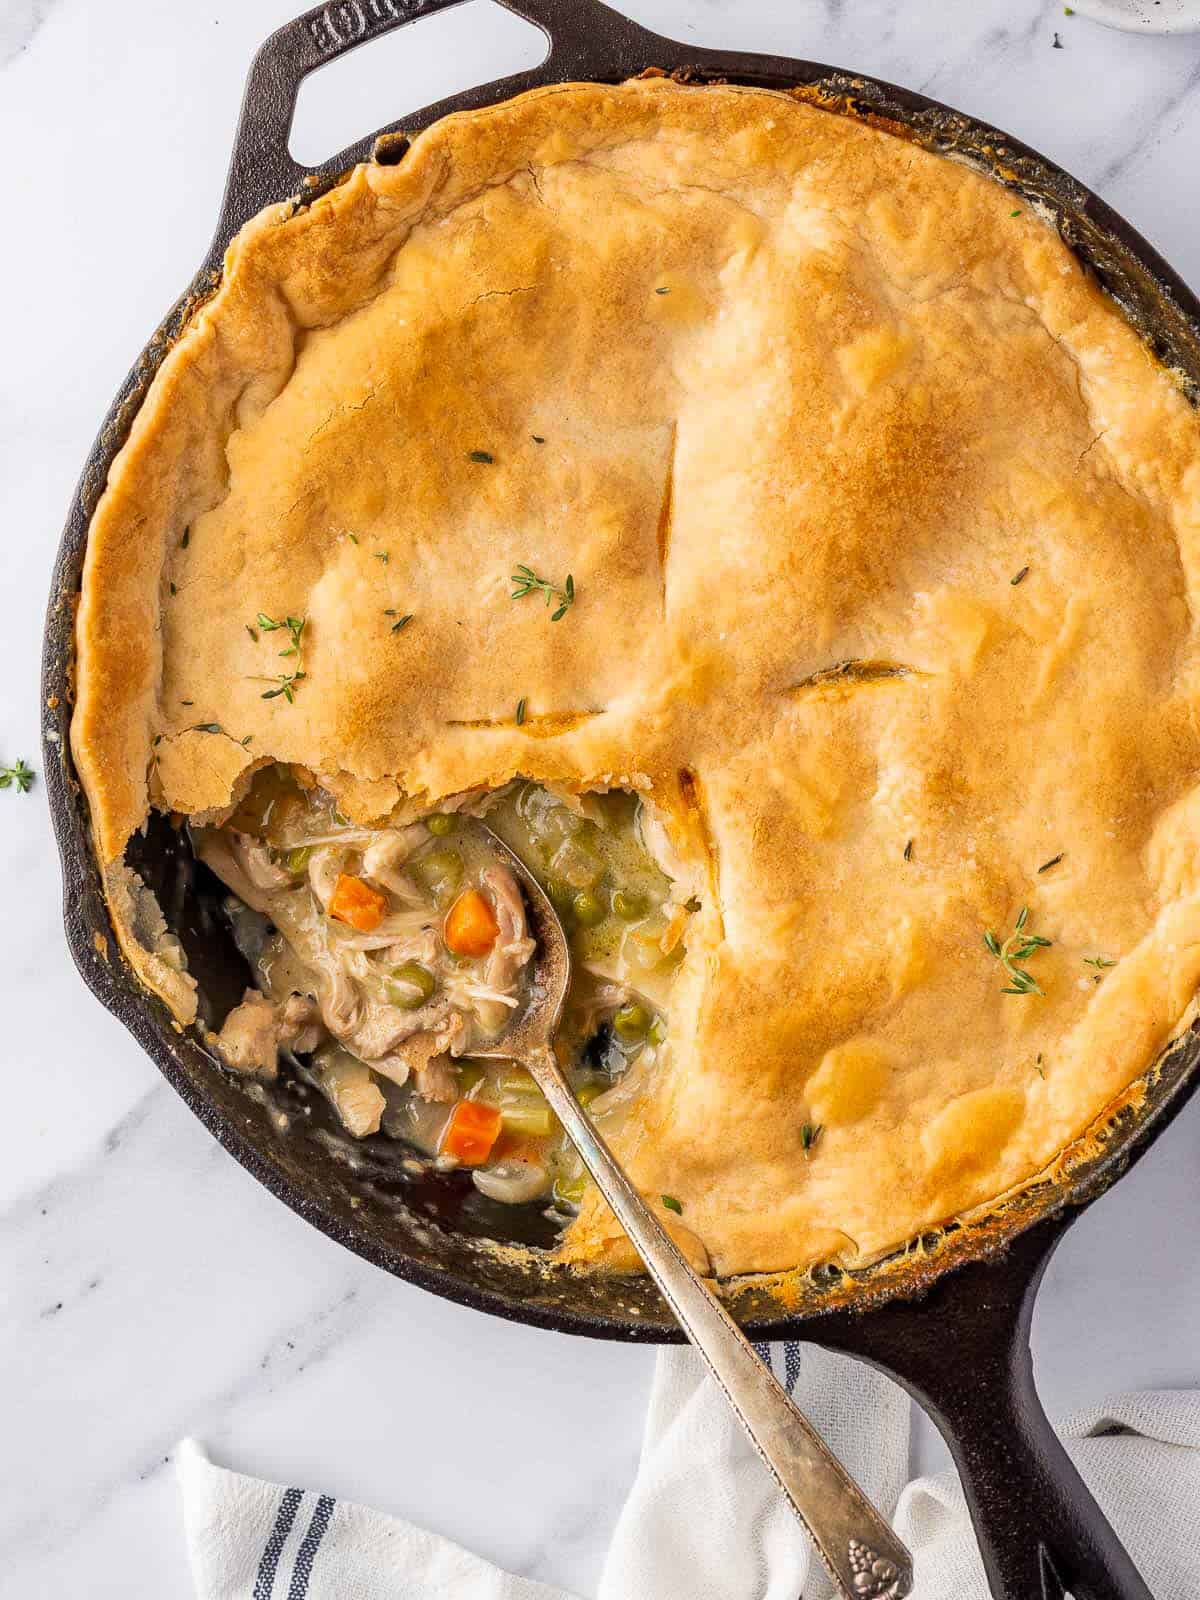 spoon in the skillet with a portion of pot pie removed